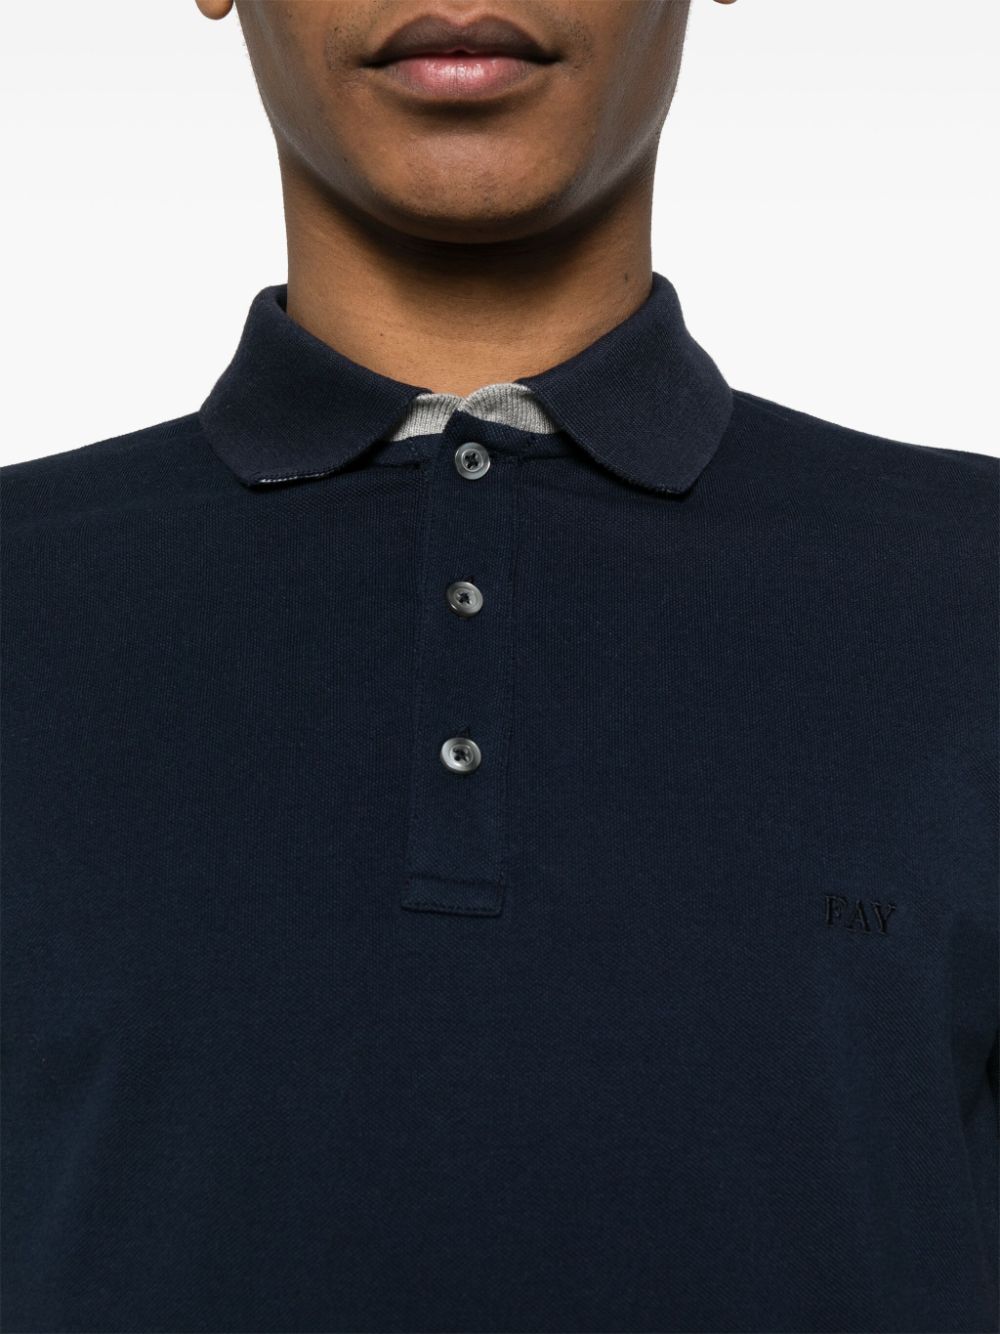 Blue polo shirt with embroidery